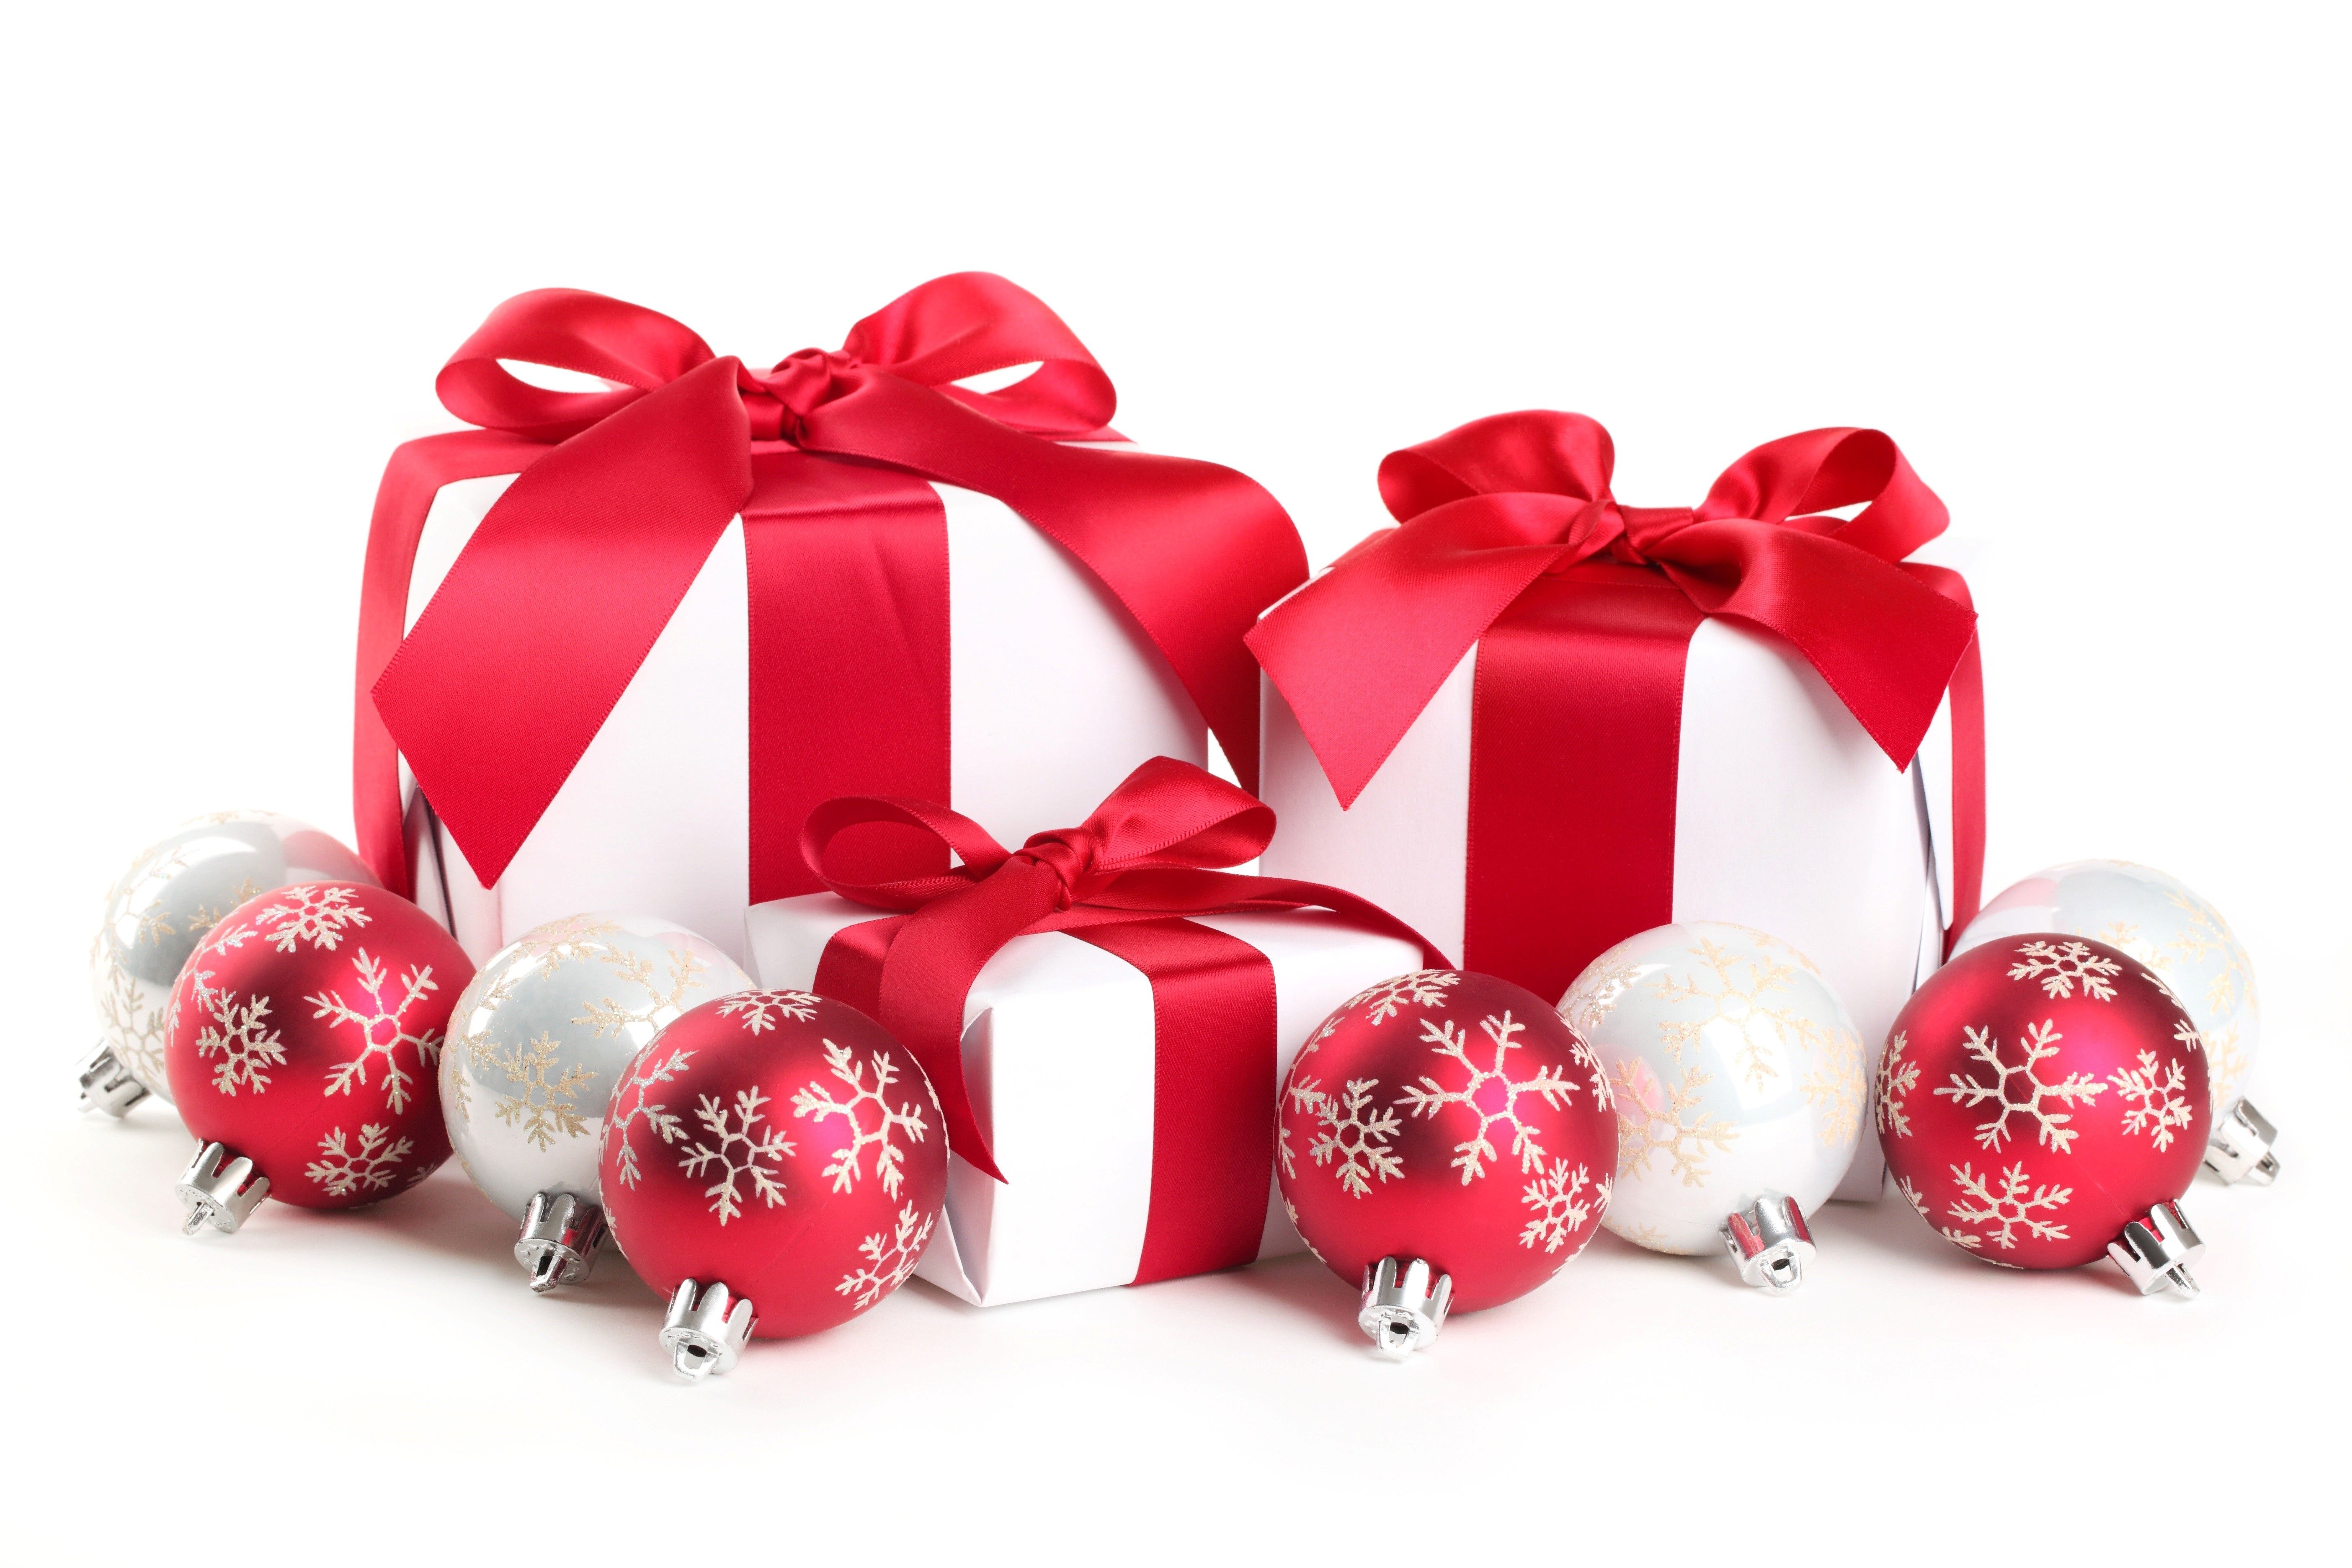 Red and White Christmas Balls and Gifts Wallpaper